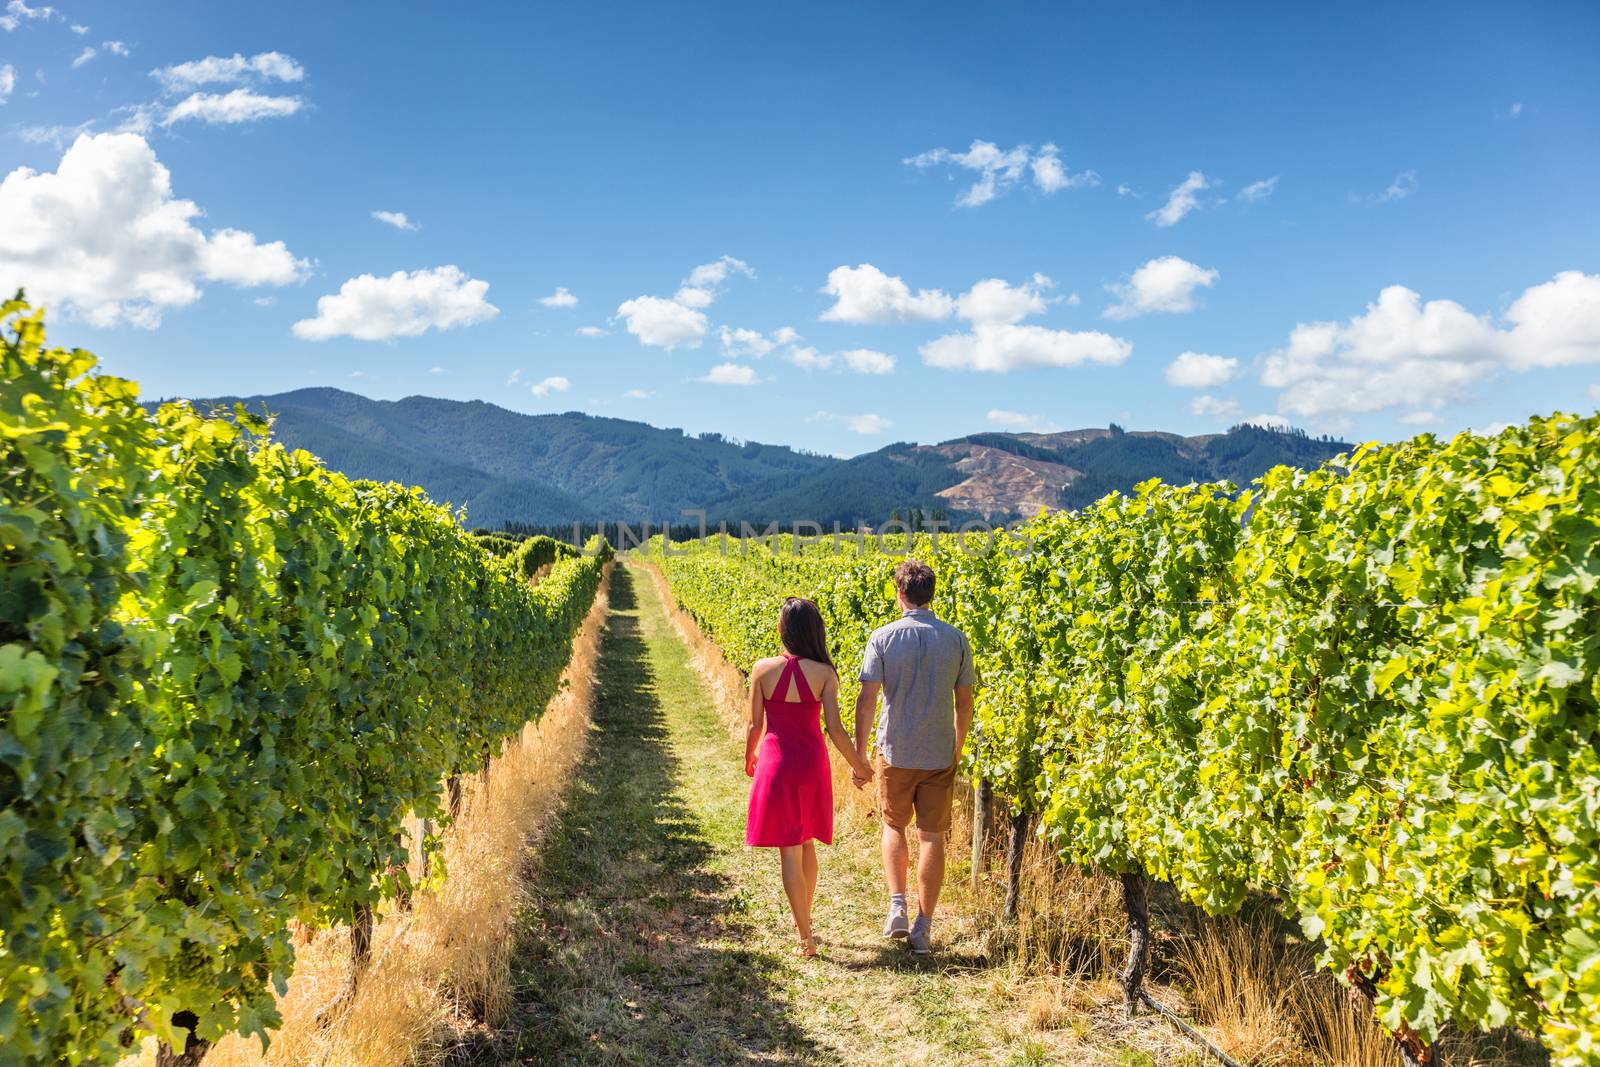 Vineyard couple tourists New Zealand travel visiting Marlborough region winery walking amongst grapevines. People on holiday wine tasting experience in summer valley landscape.